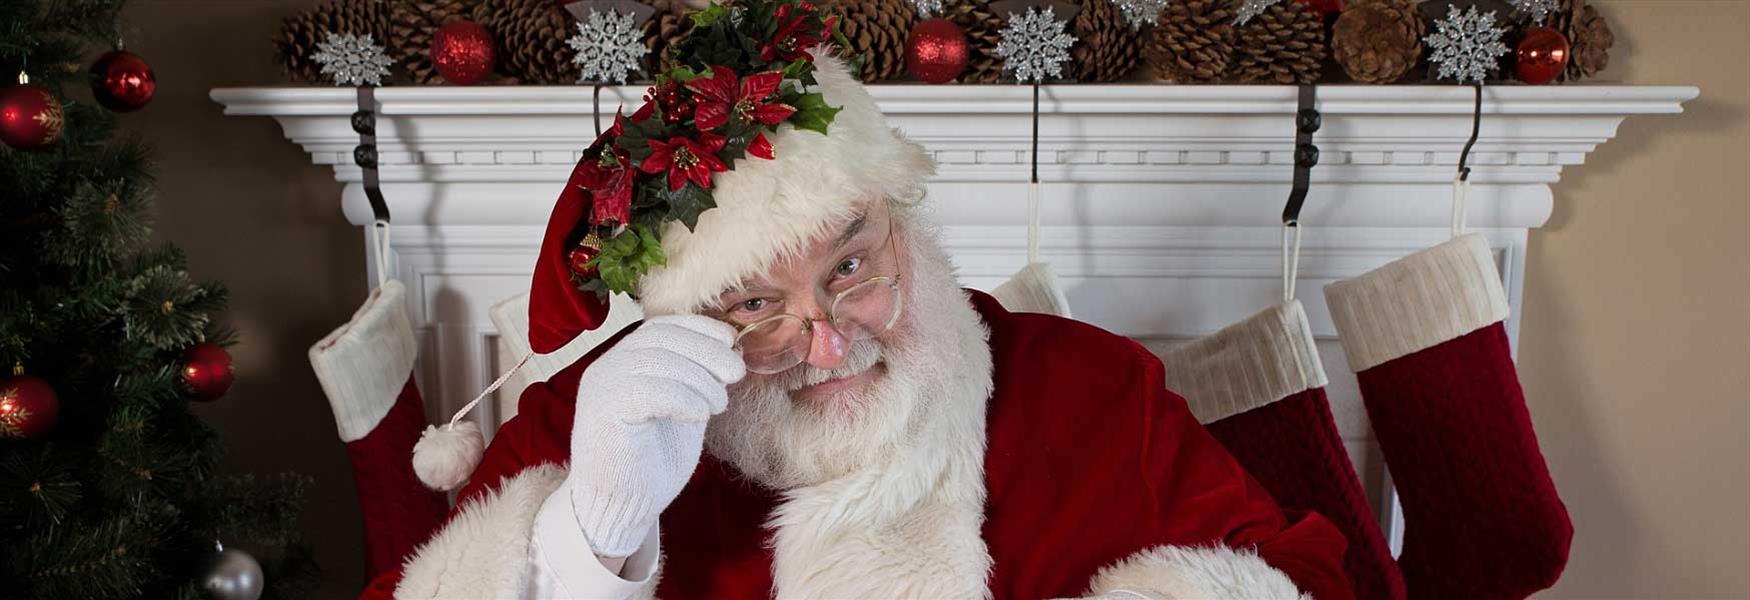 Where can I see Santa in Cheshire this Christmas?